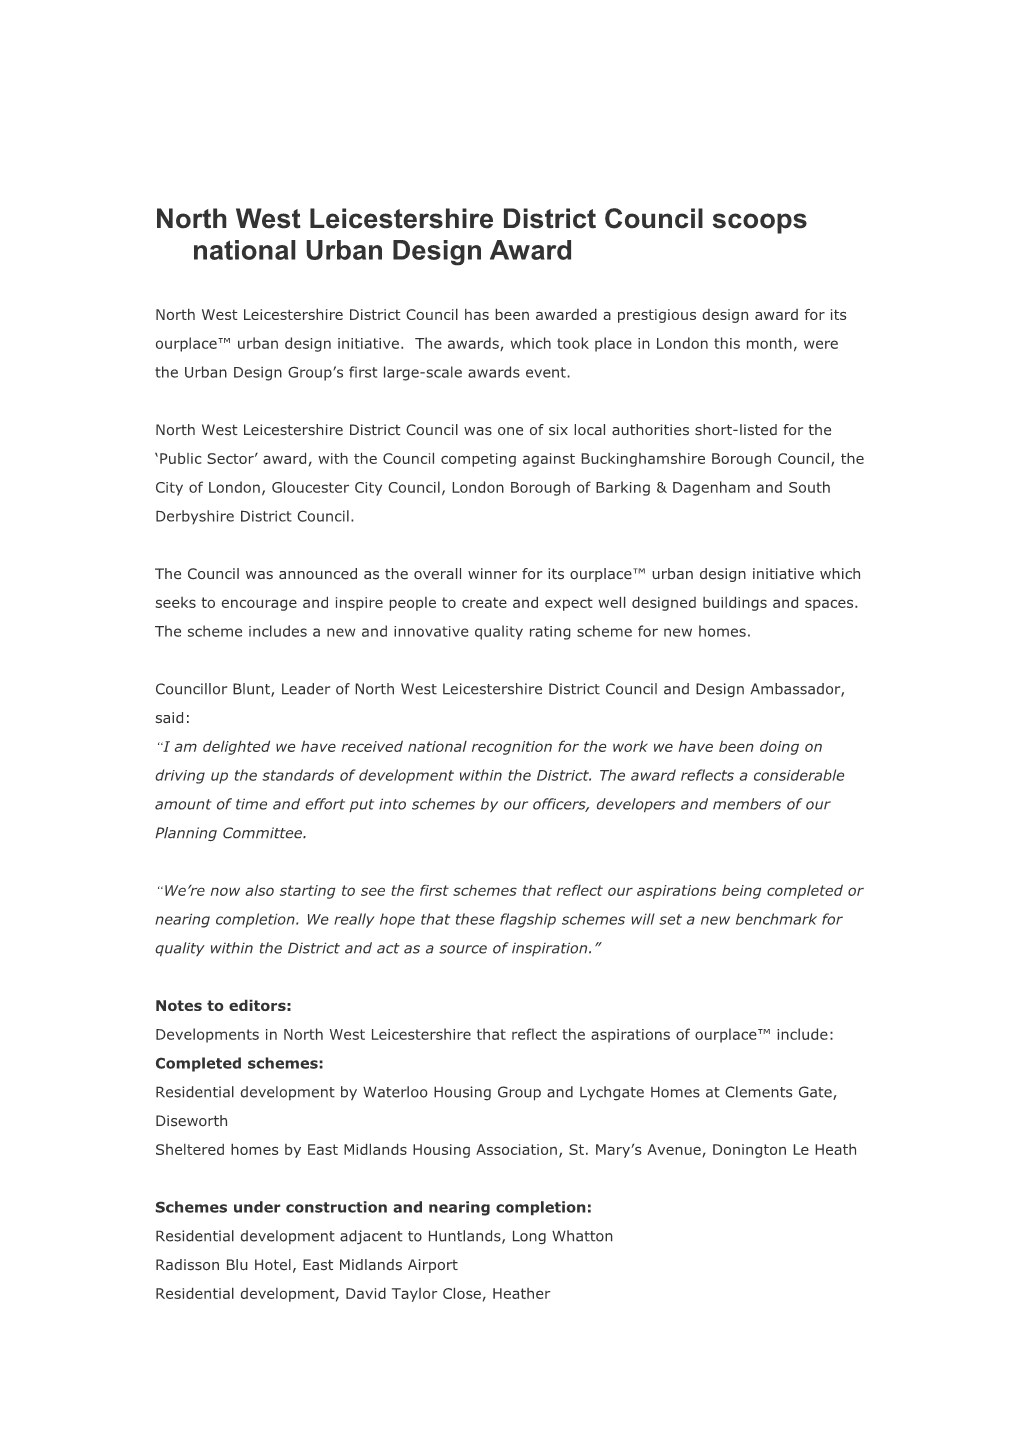 North West Leicestershire District Council Scoops National Urban Design Award